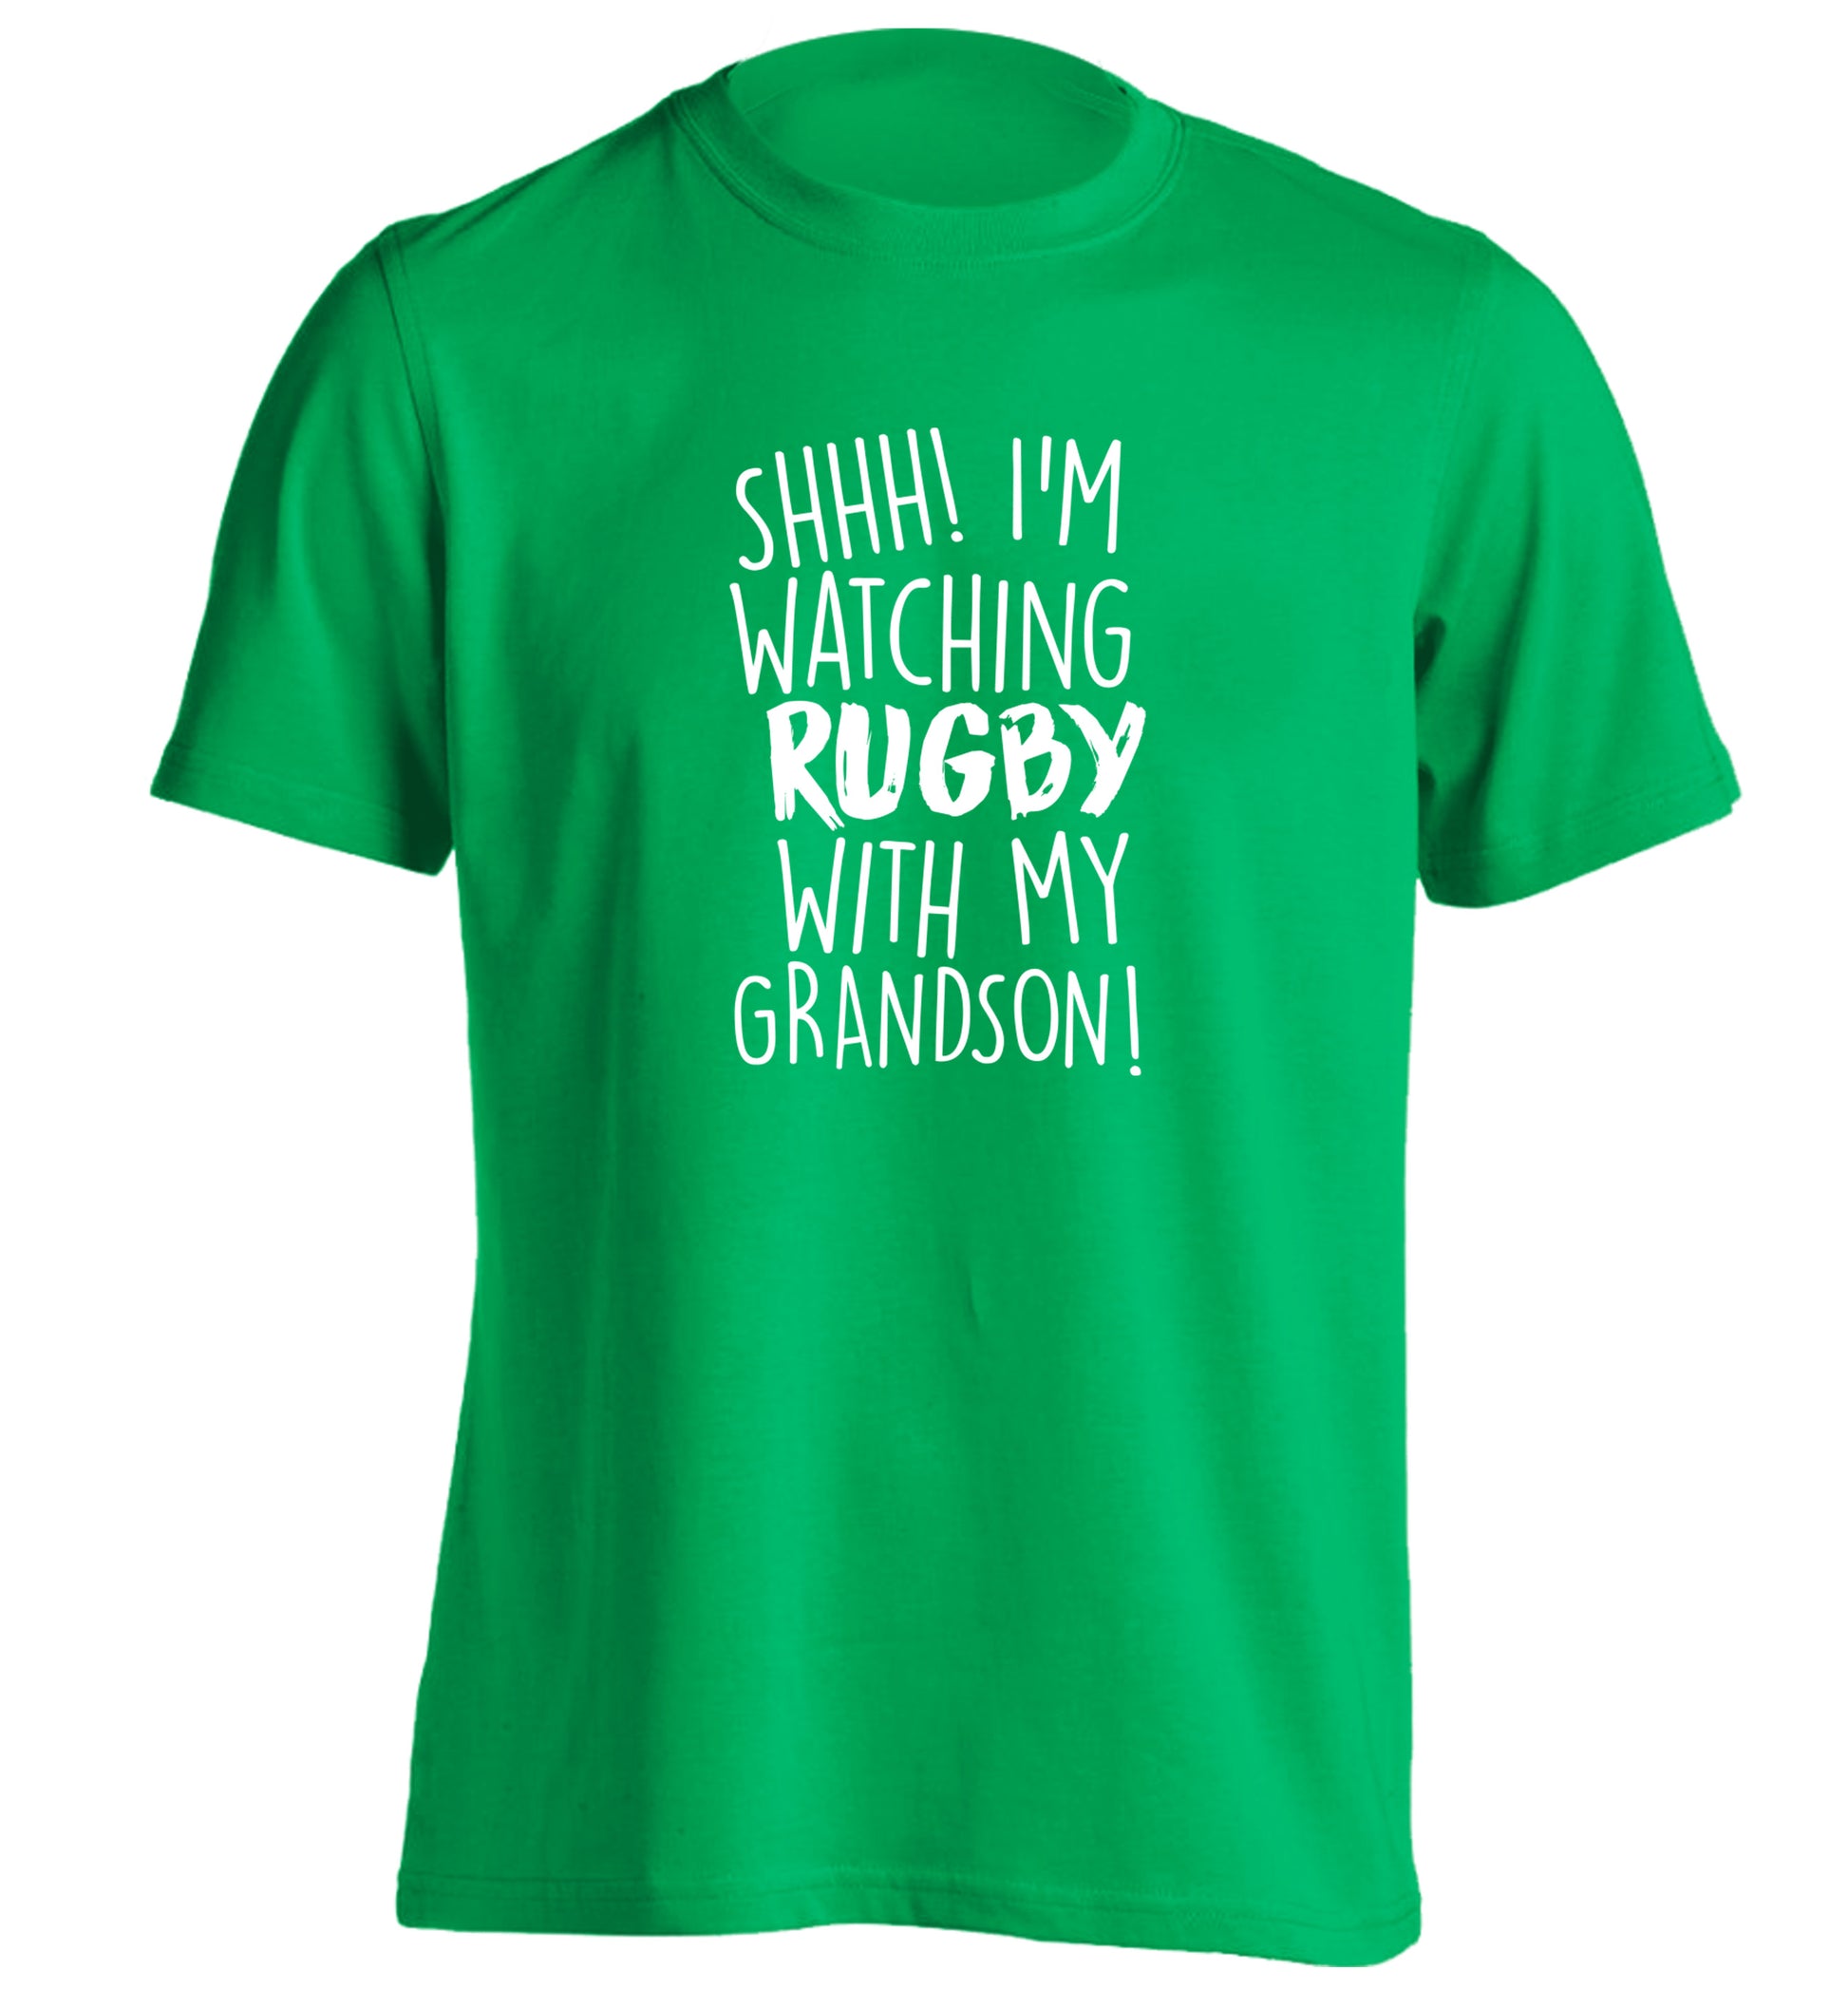 Shh I'm watching rugby with my grandson adults unisex green Tshirt 2XL